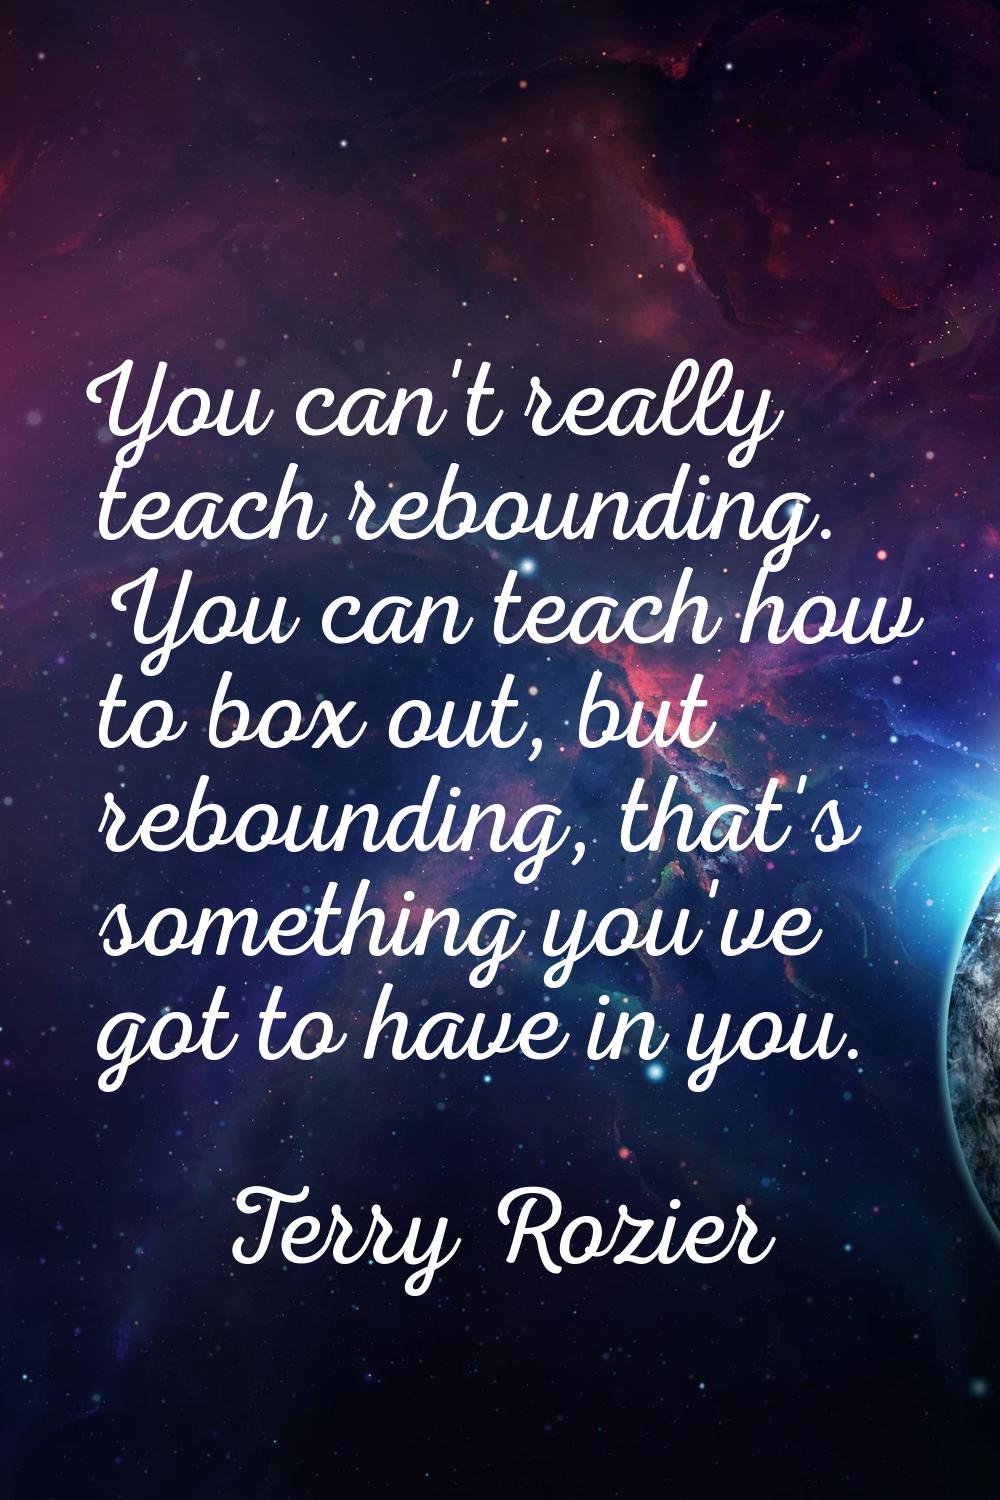 You can't really teach rebounding. You can teach how to box out, but rebounding, that's something y